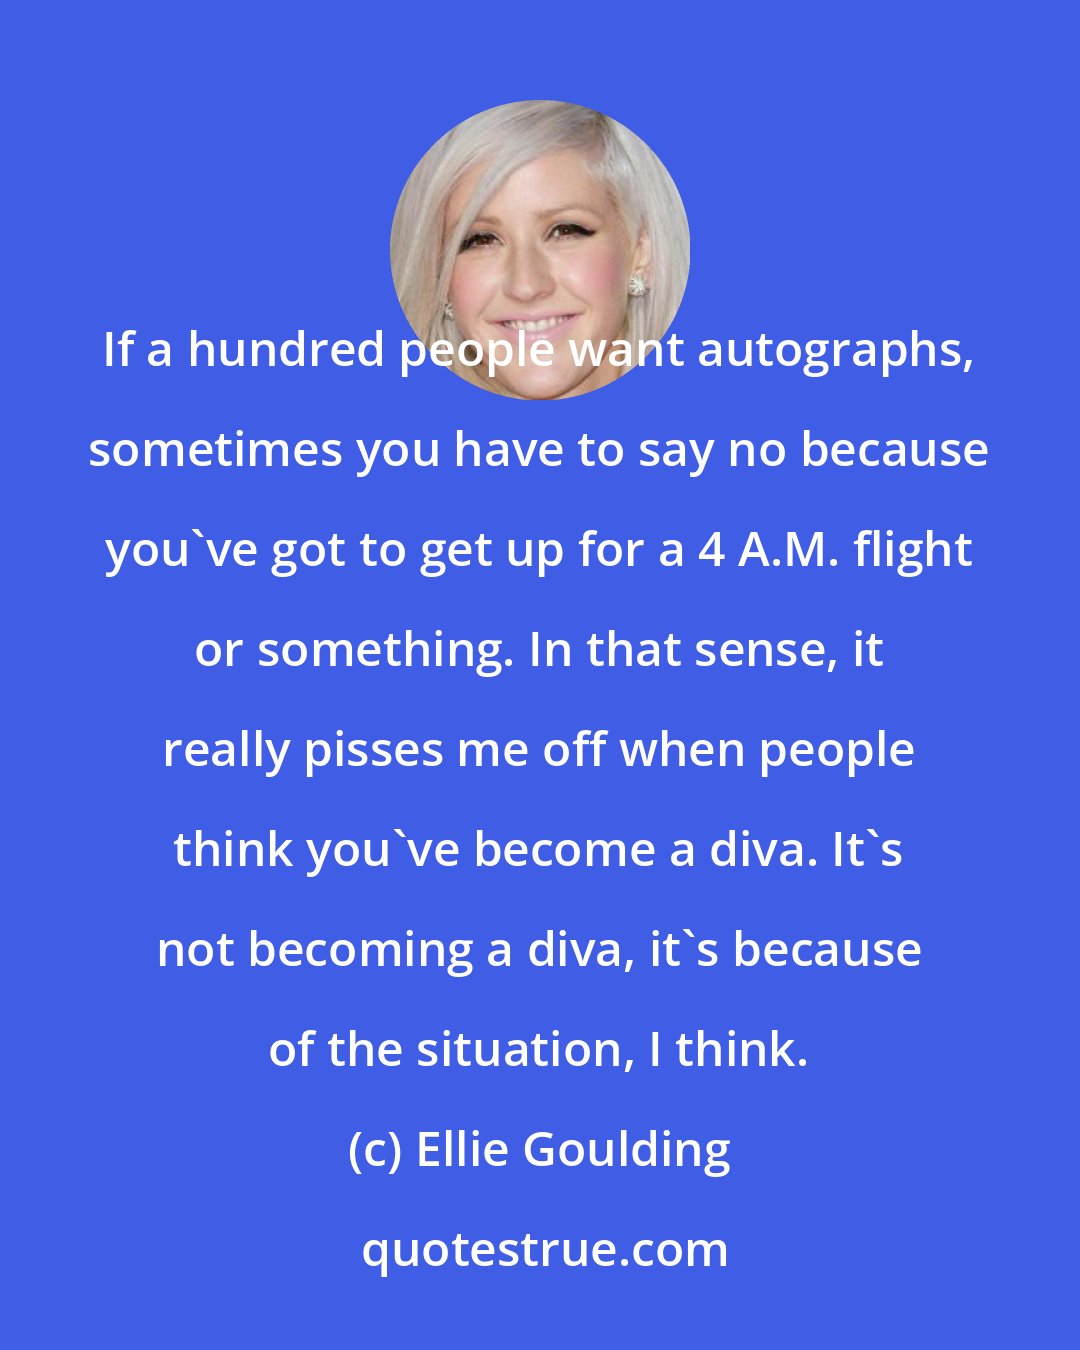 Ellie Goulding: If a hundred people want autographs, sometimes you have to say no because you've got to get up for a 4 A.M. flight or something. In that sense, it really pisses me off when people think you've become a diva. It's not becoming a diva, it's because of the situation, I think.